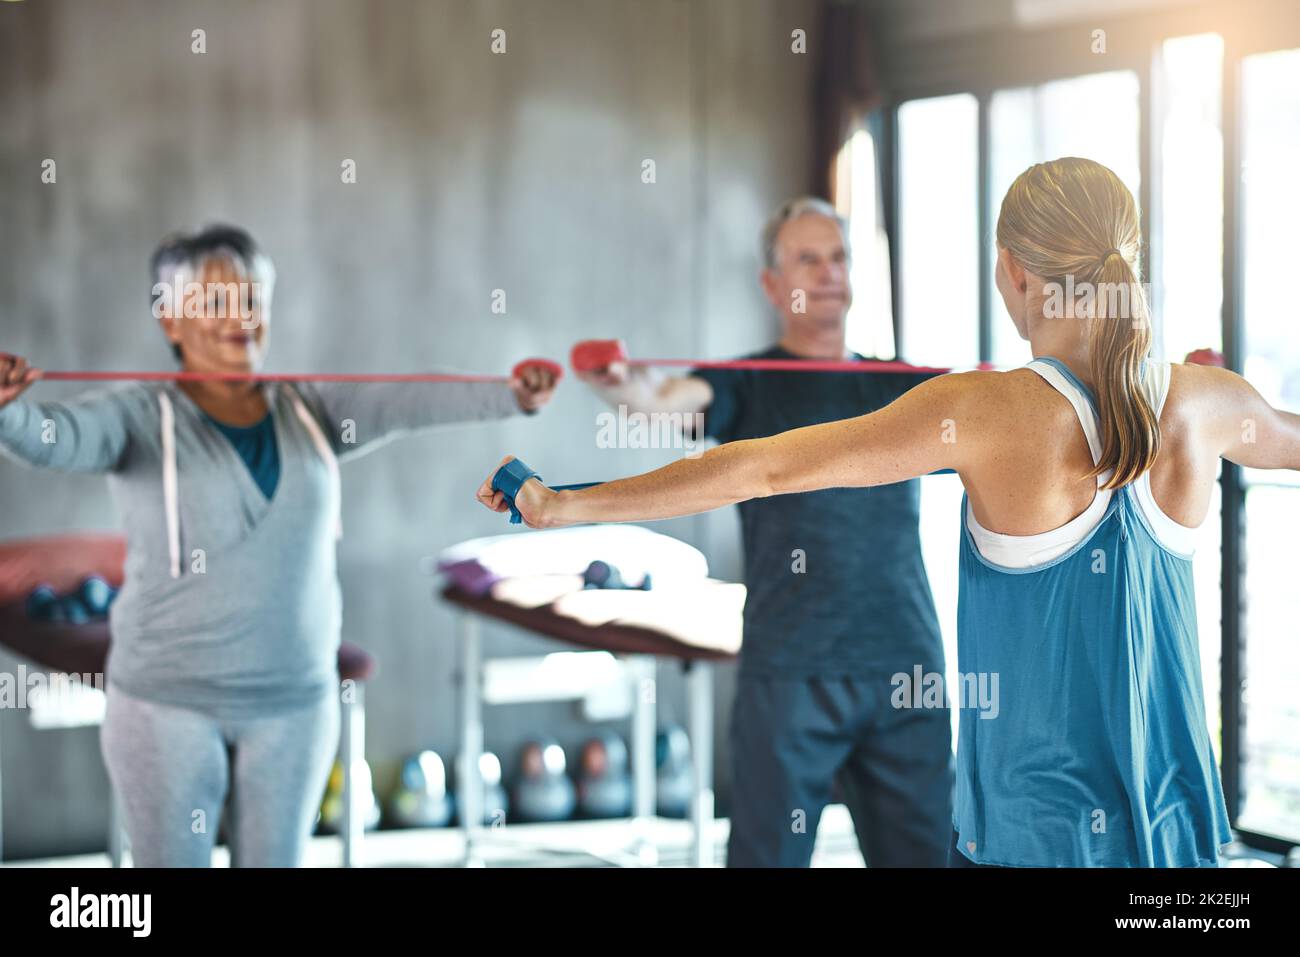 The senior years dont have to be the sedentary years. Shot of a senior man and woman using resistance bands with the help of a physical therapist. Stock Photo